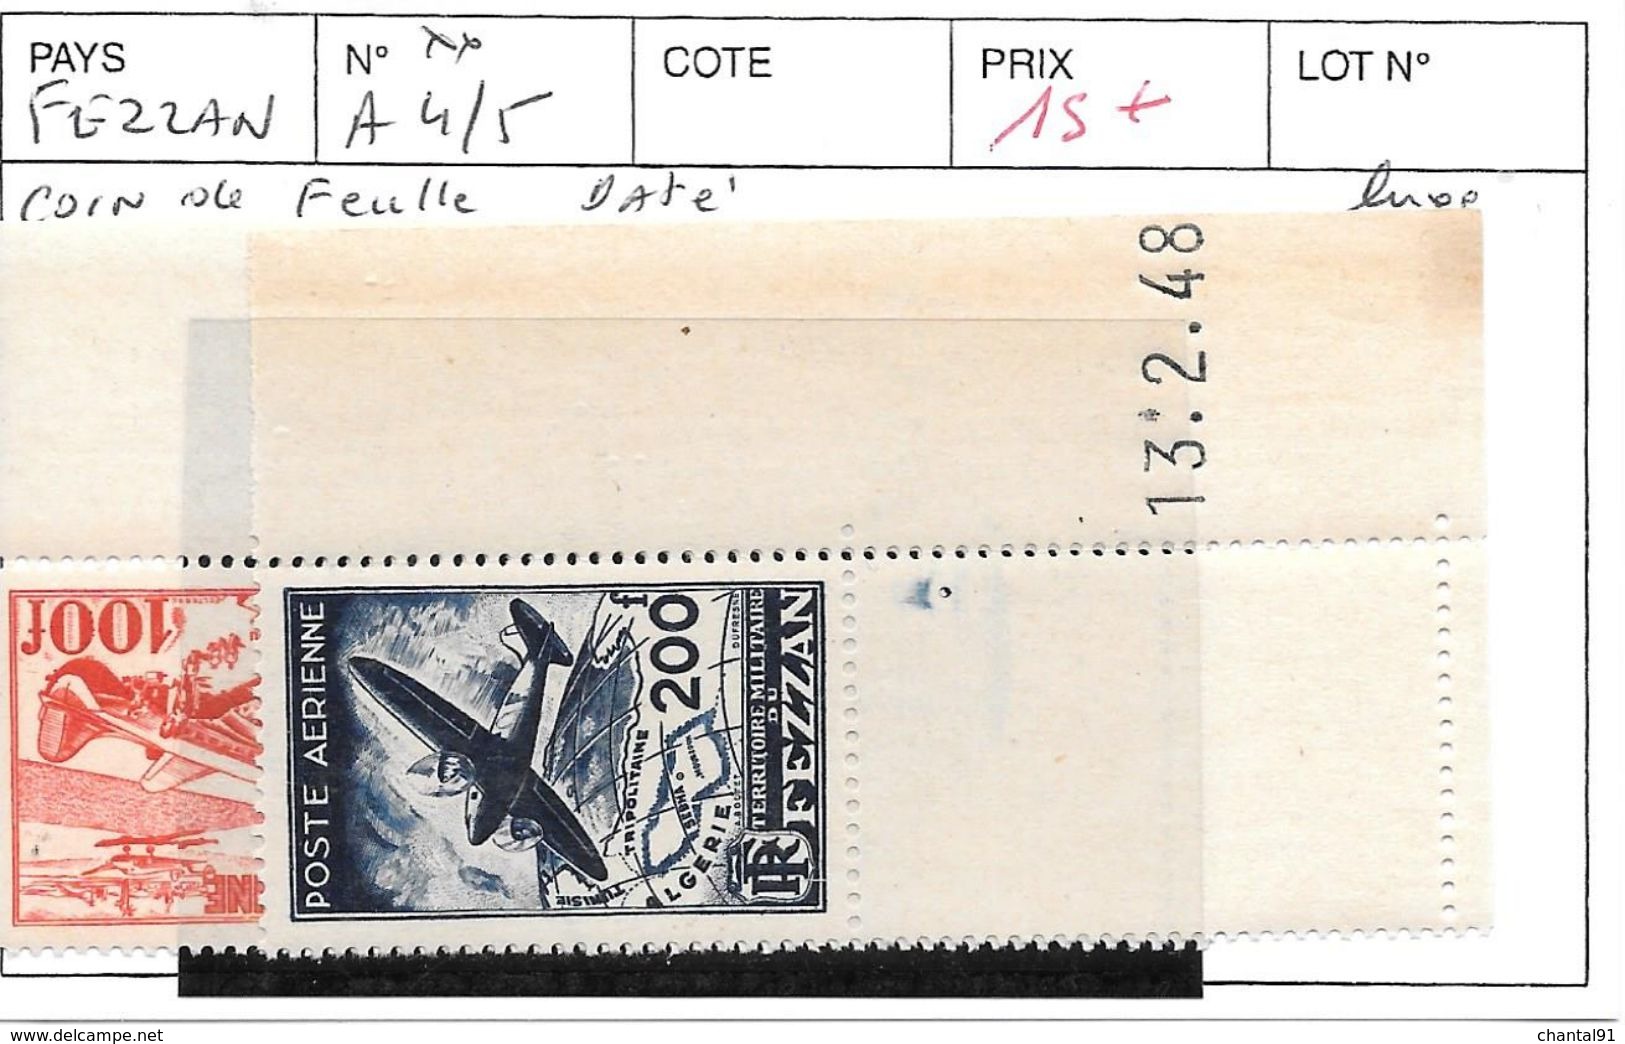 FEZZAN N° A 4/5 FEUILLE DATE - Unused Stamps